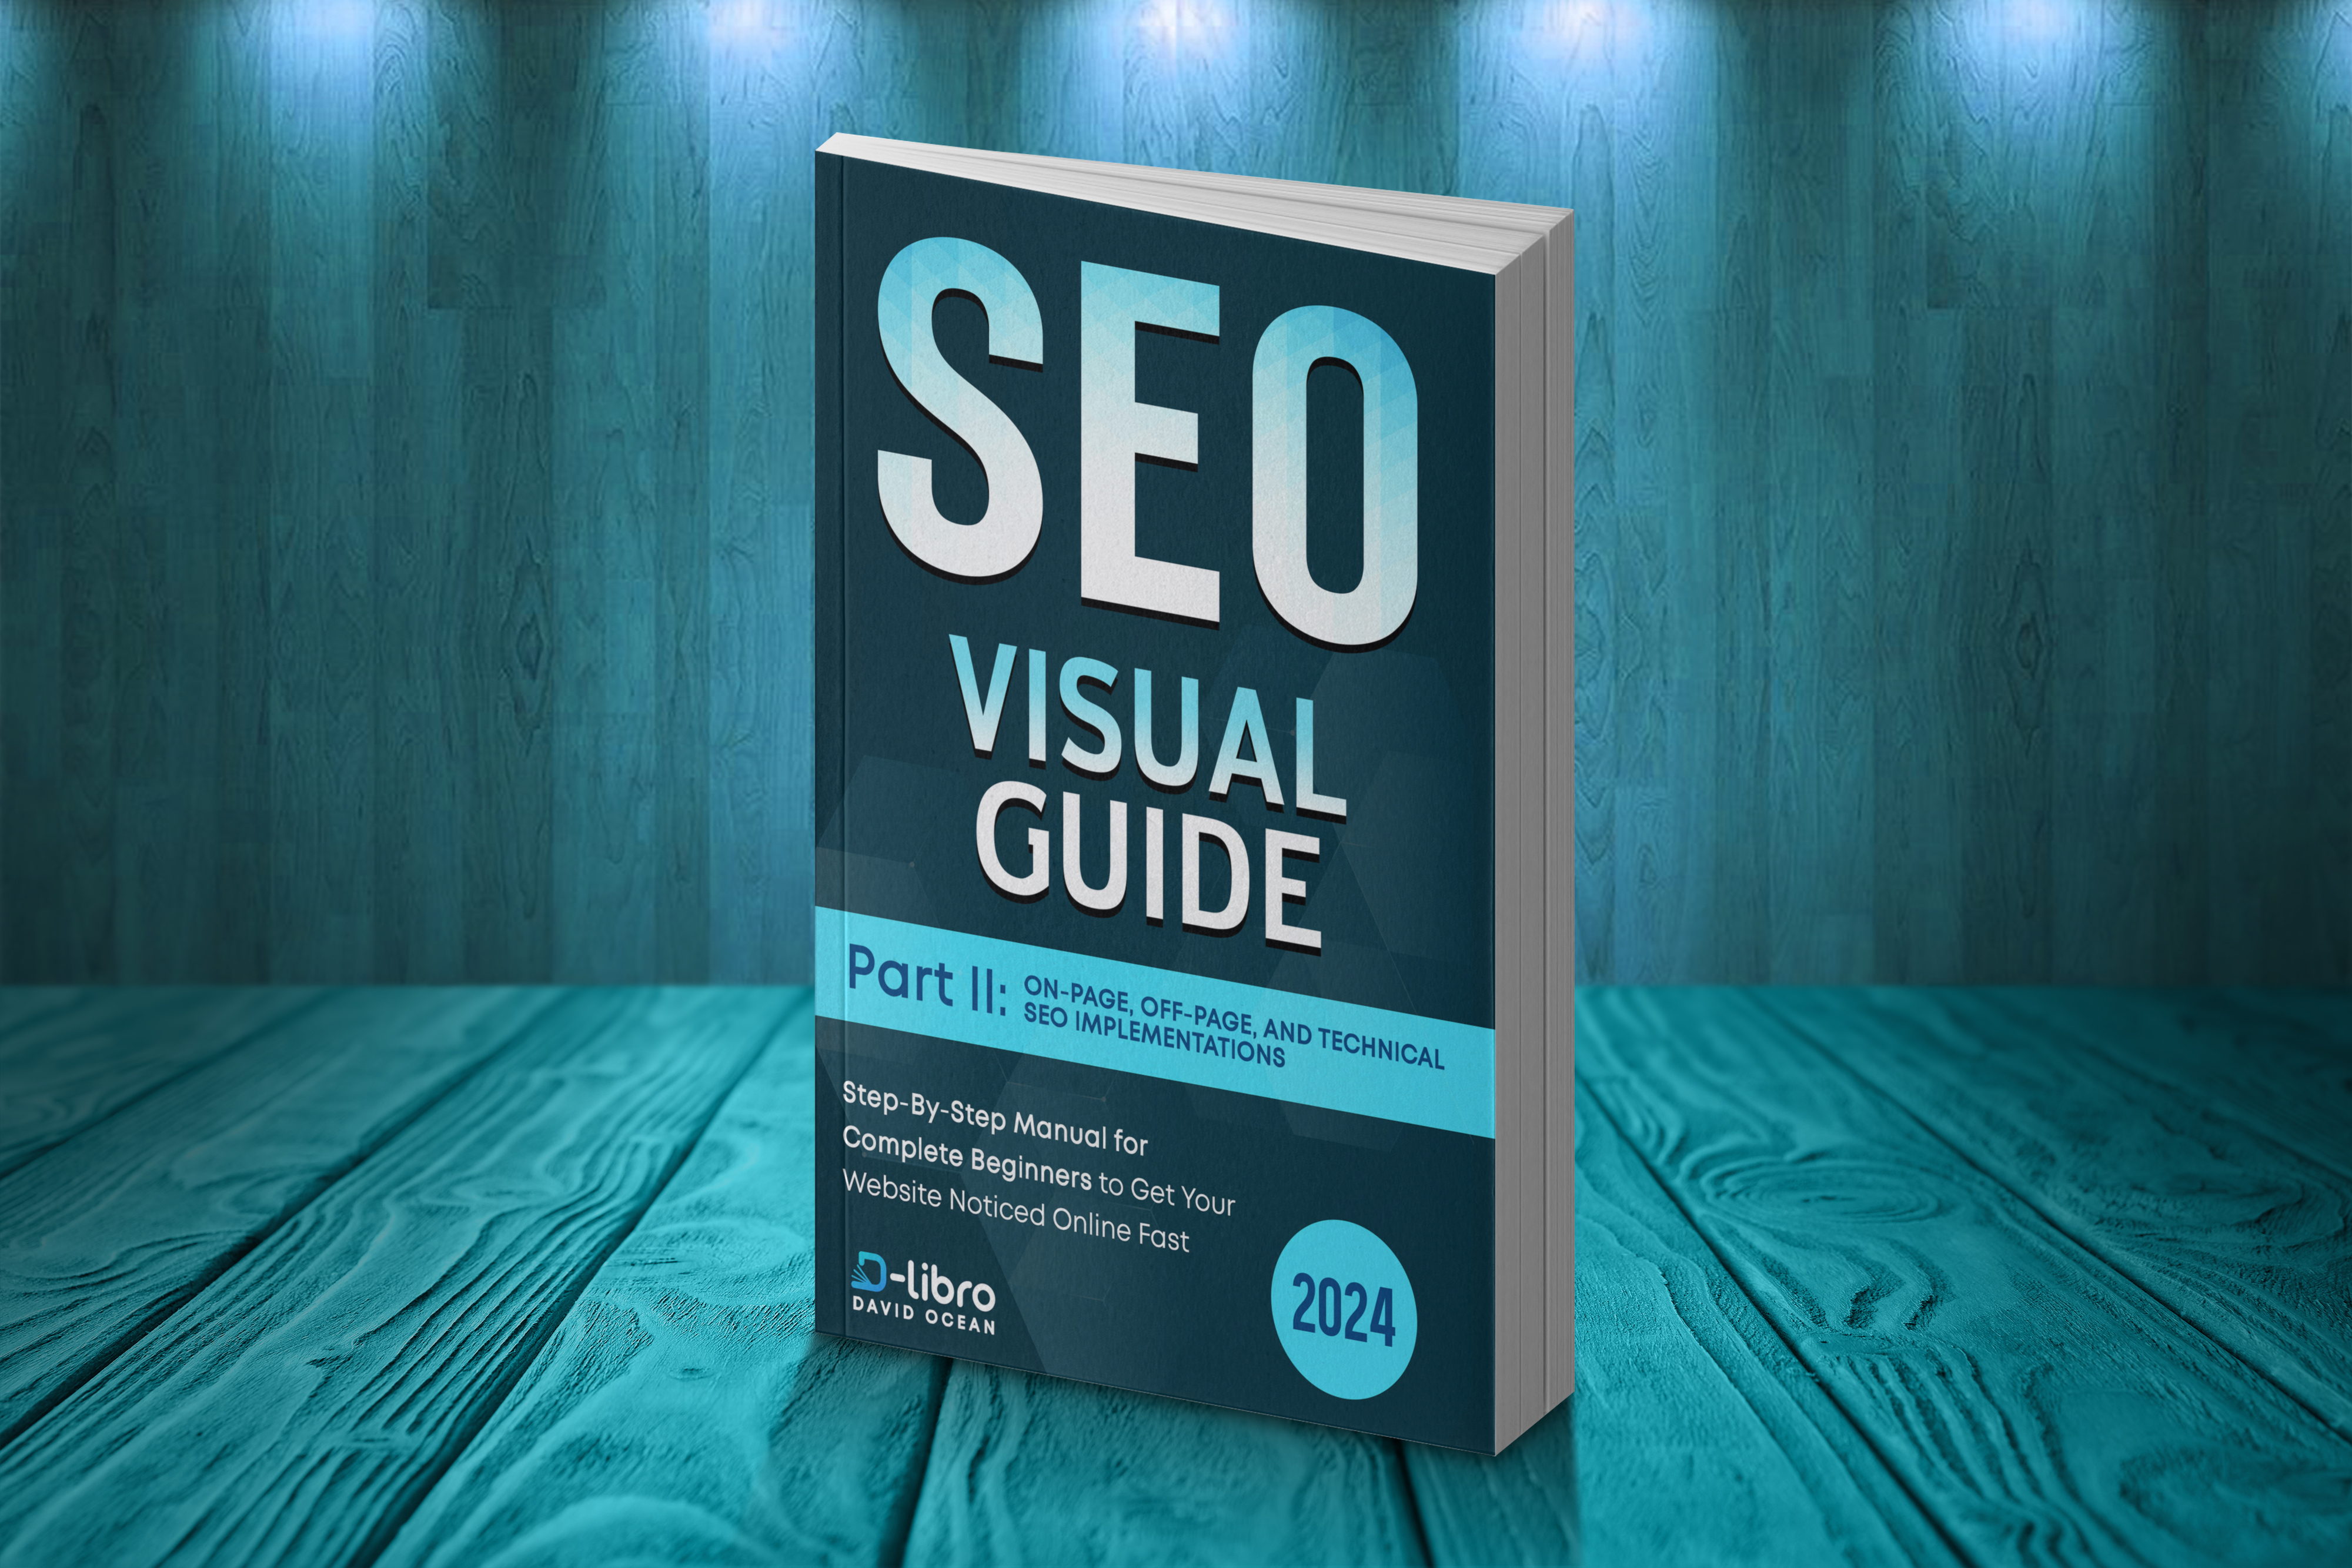 Search Engine Optimization (SEO) Visual Guide – Part II: On-Page, Off-Page, and Technical SEO Implementations.Step-By-Step Manual for Complete Beginners to Get Your Website Noticed Online Fast.